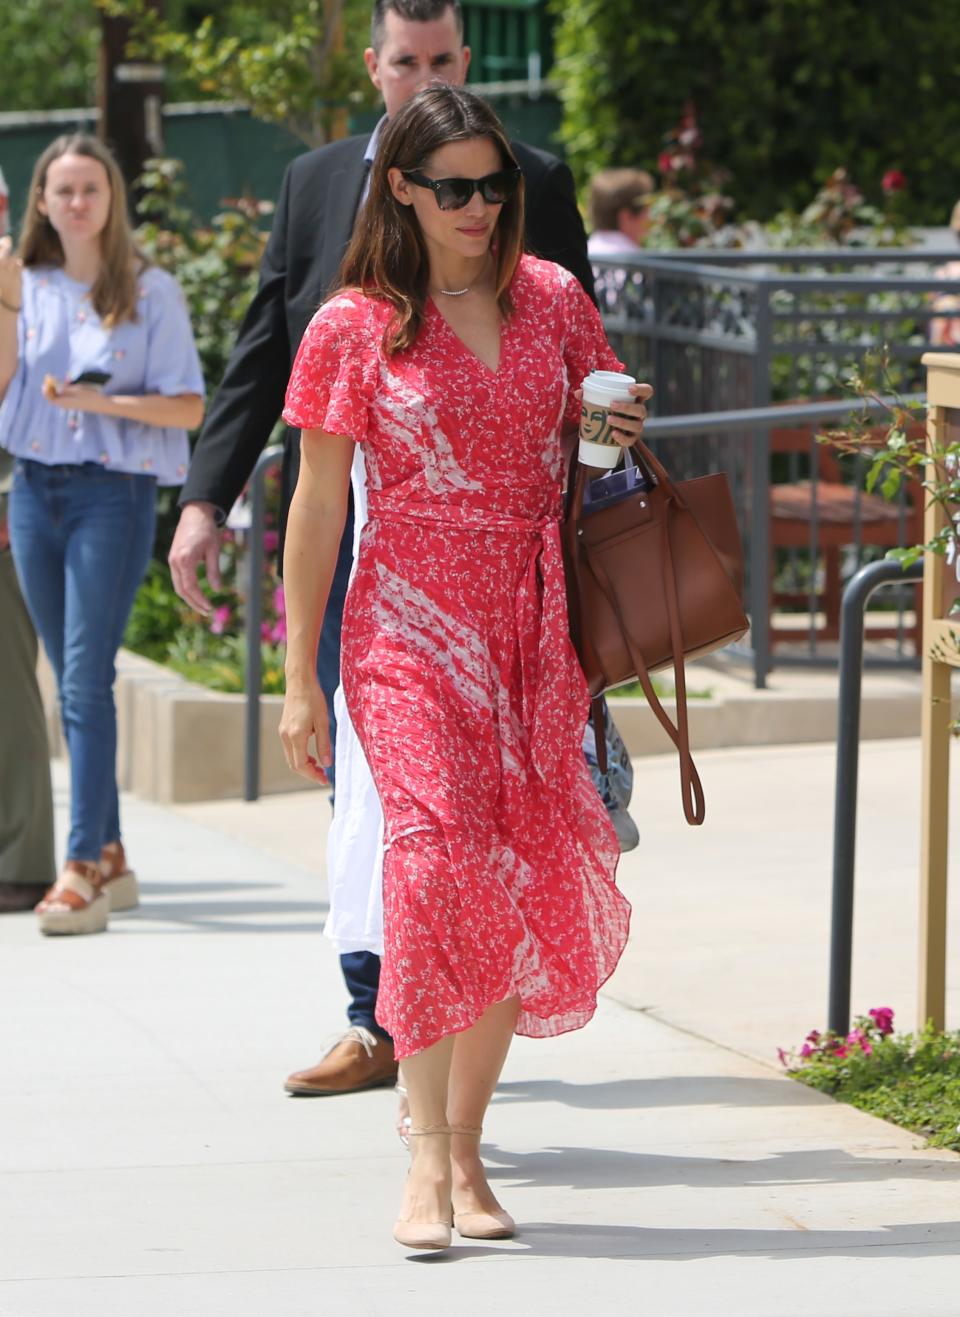 Garner wearing Tanya Taylor's New Blaire dress, available at Nordstrom.